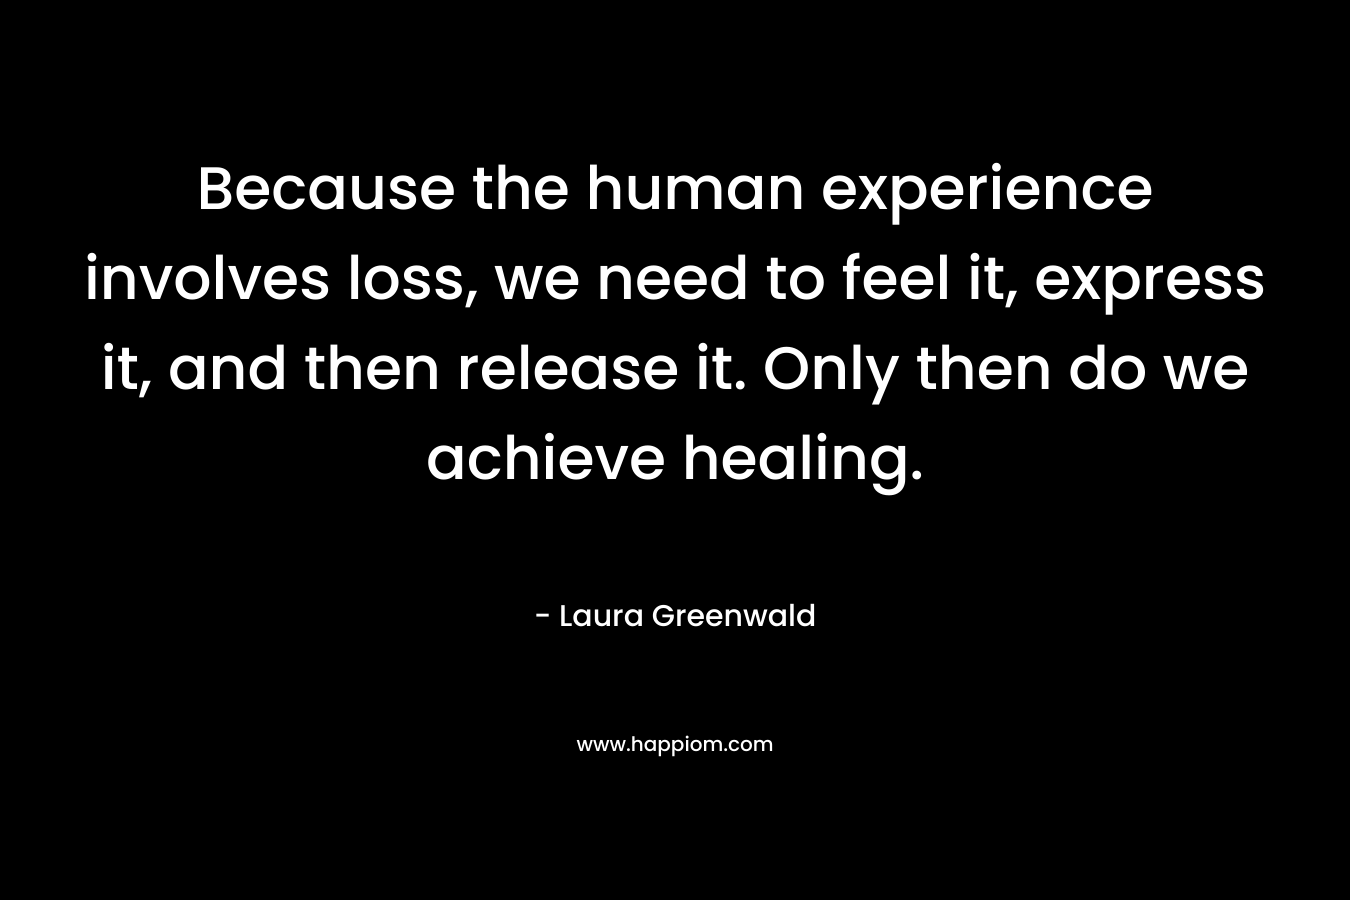 Because the human experience involves loss, we need to feel it, express it, and then release it. Only then do we achieve healing. – Laura Greenwald